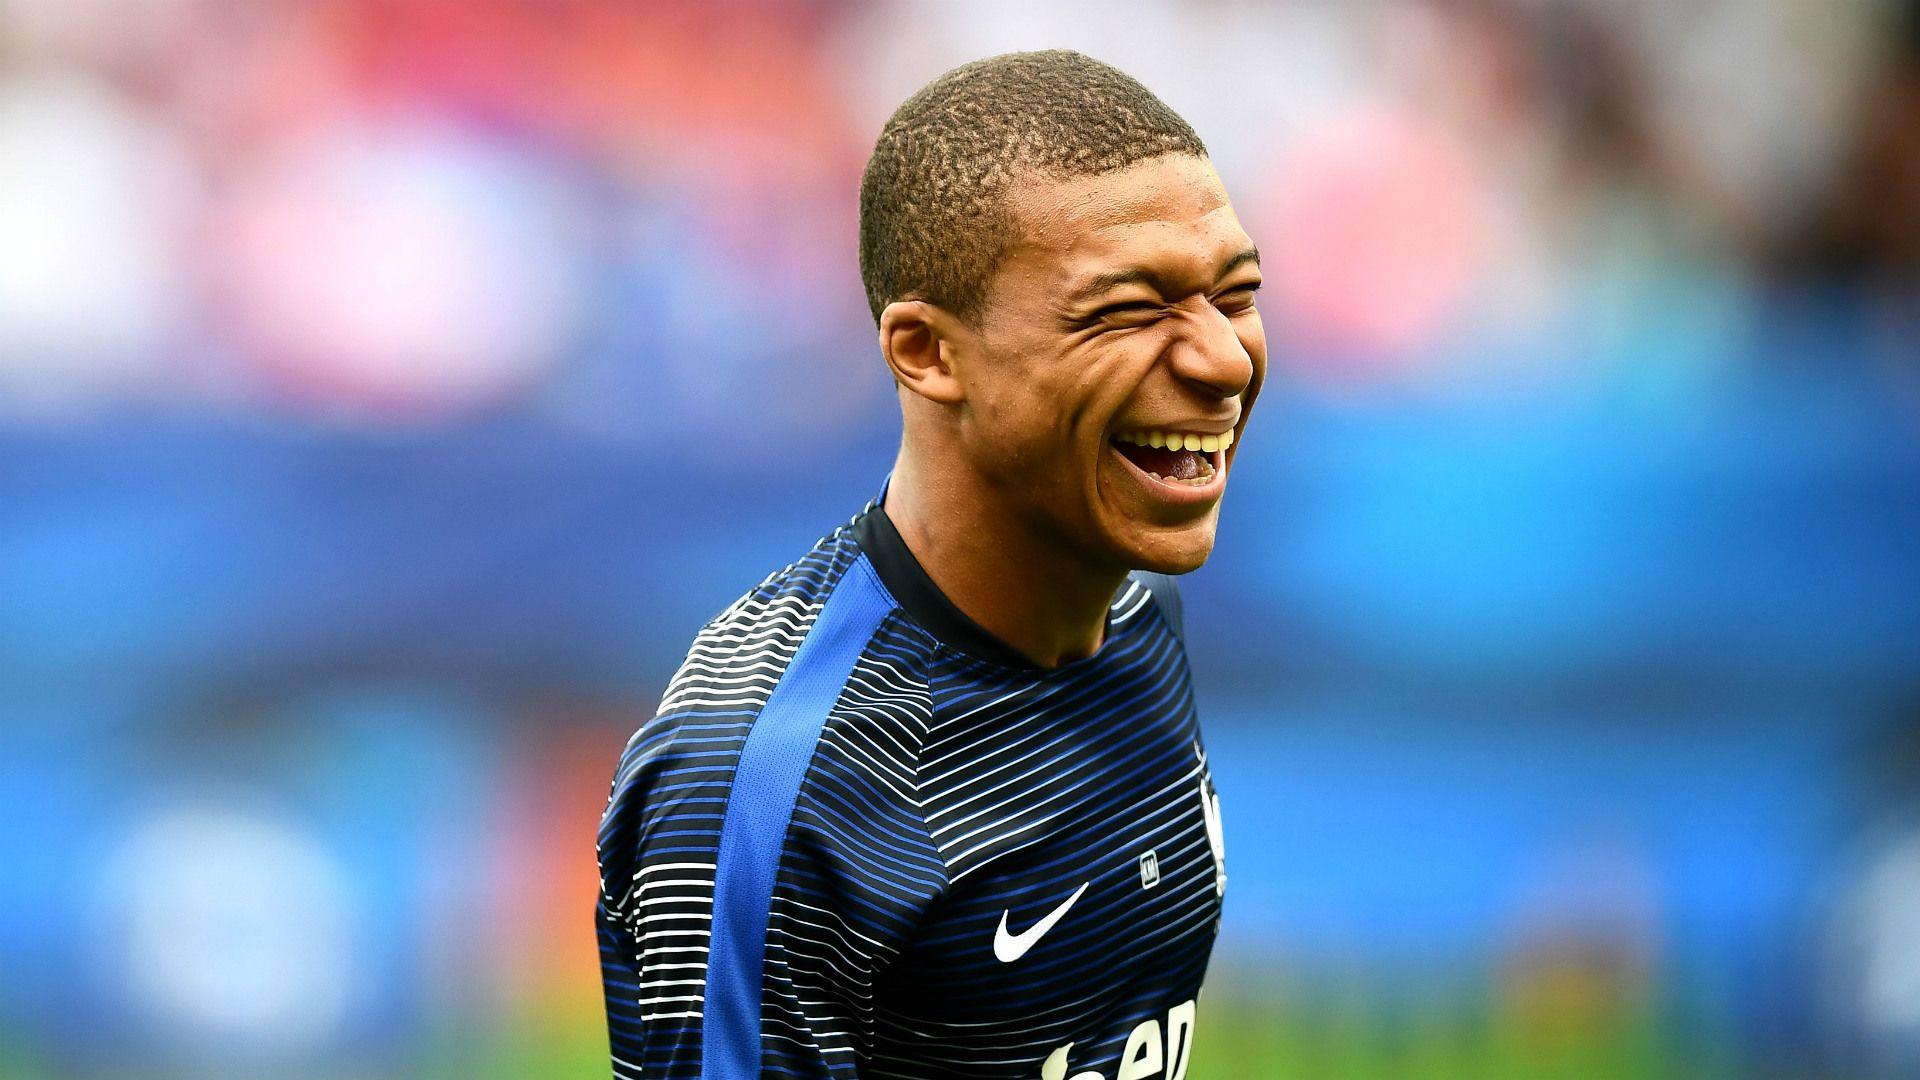 Kylian Mbappe: Monaco star 'born to be the best player in the world